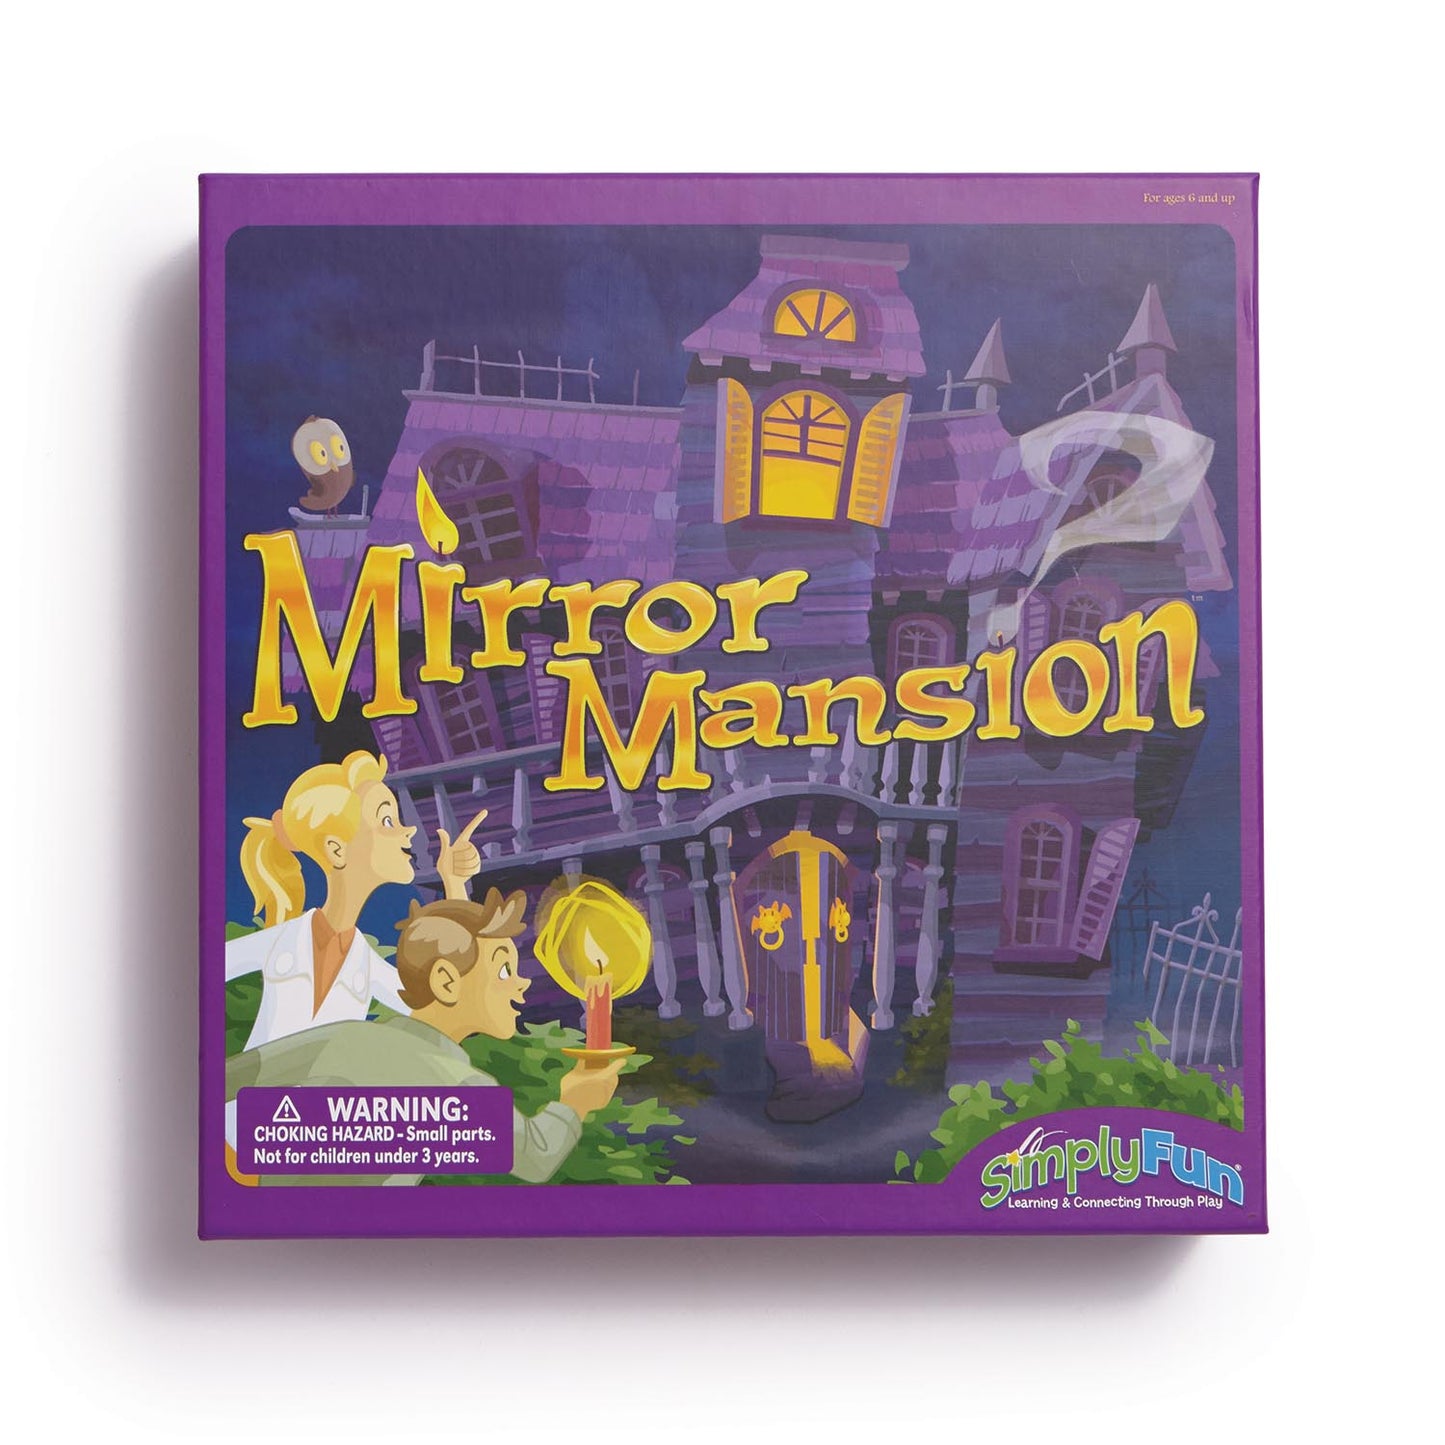 Mirror Mansion: Geometry game and memory game